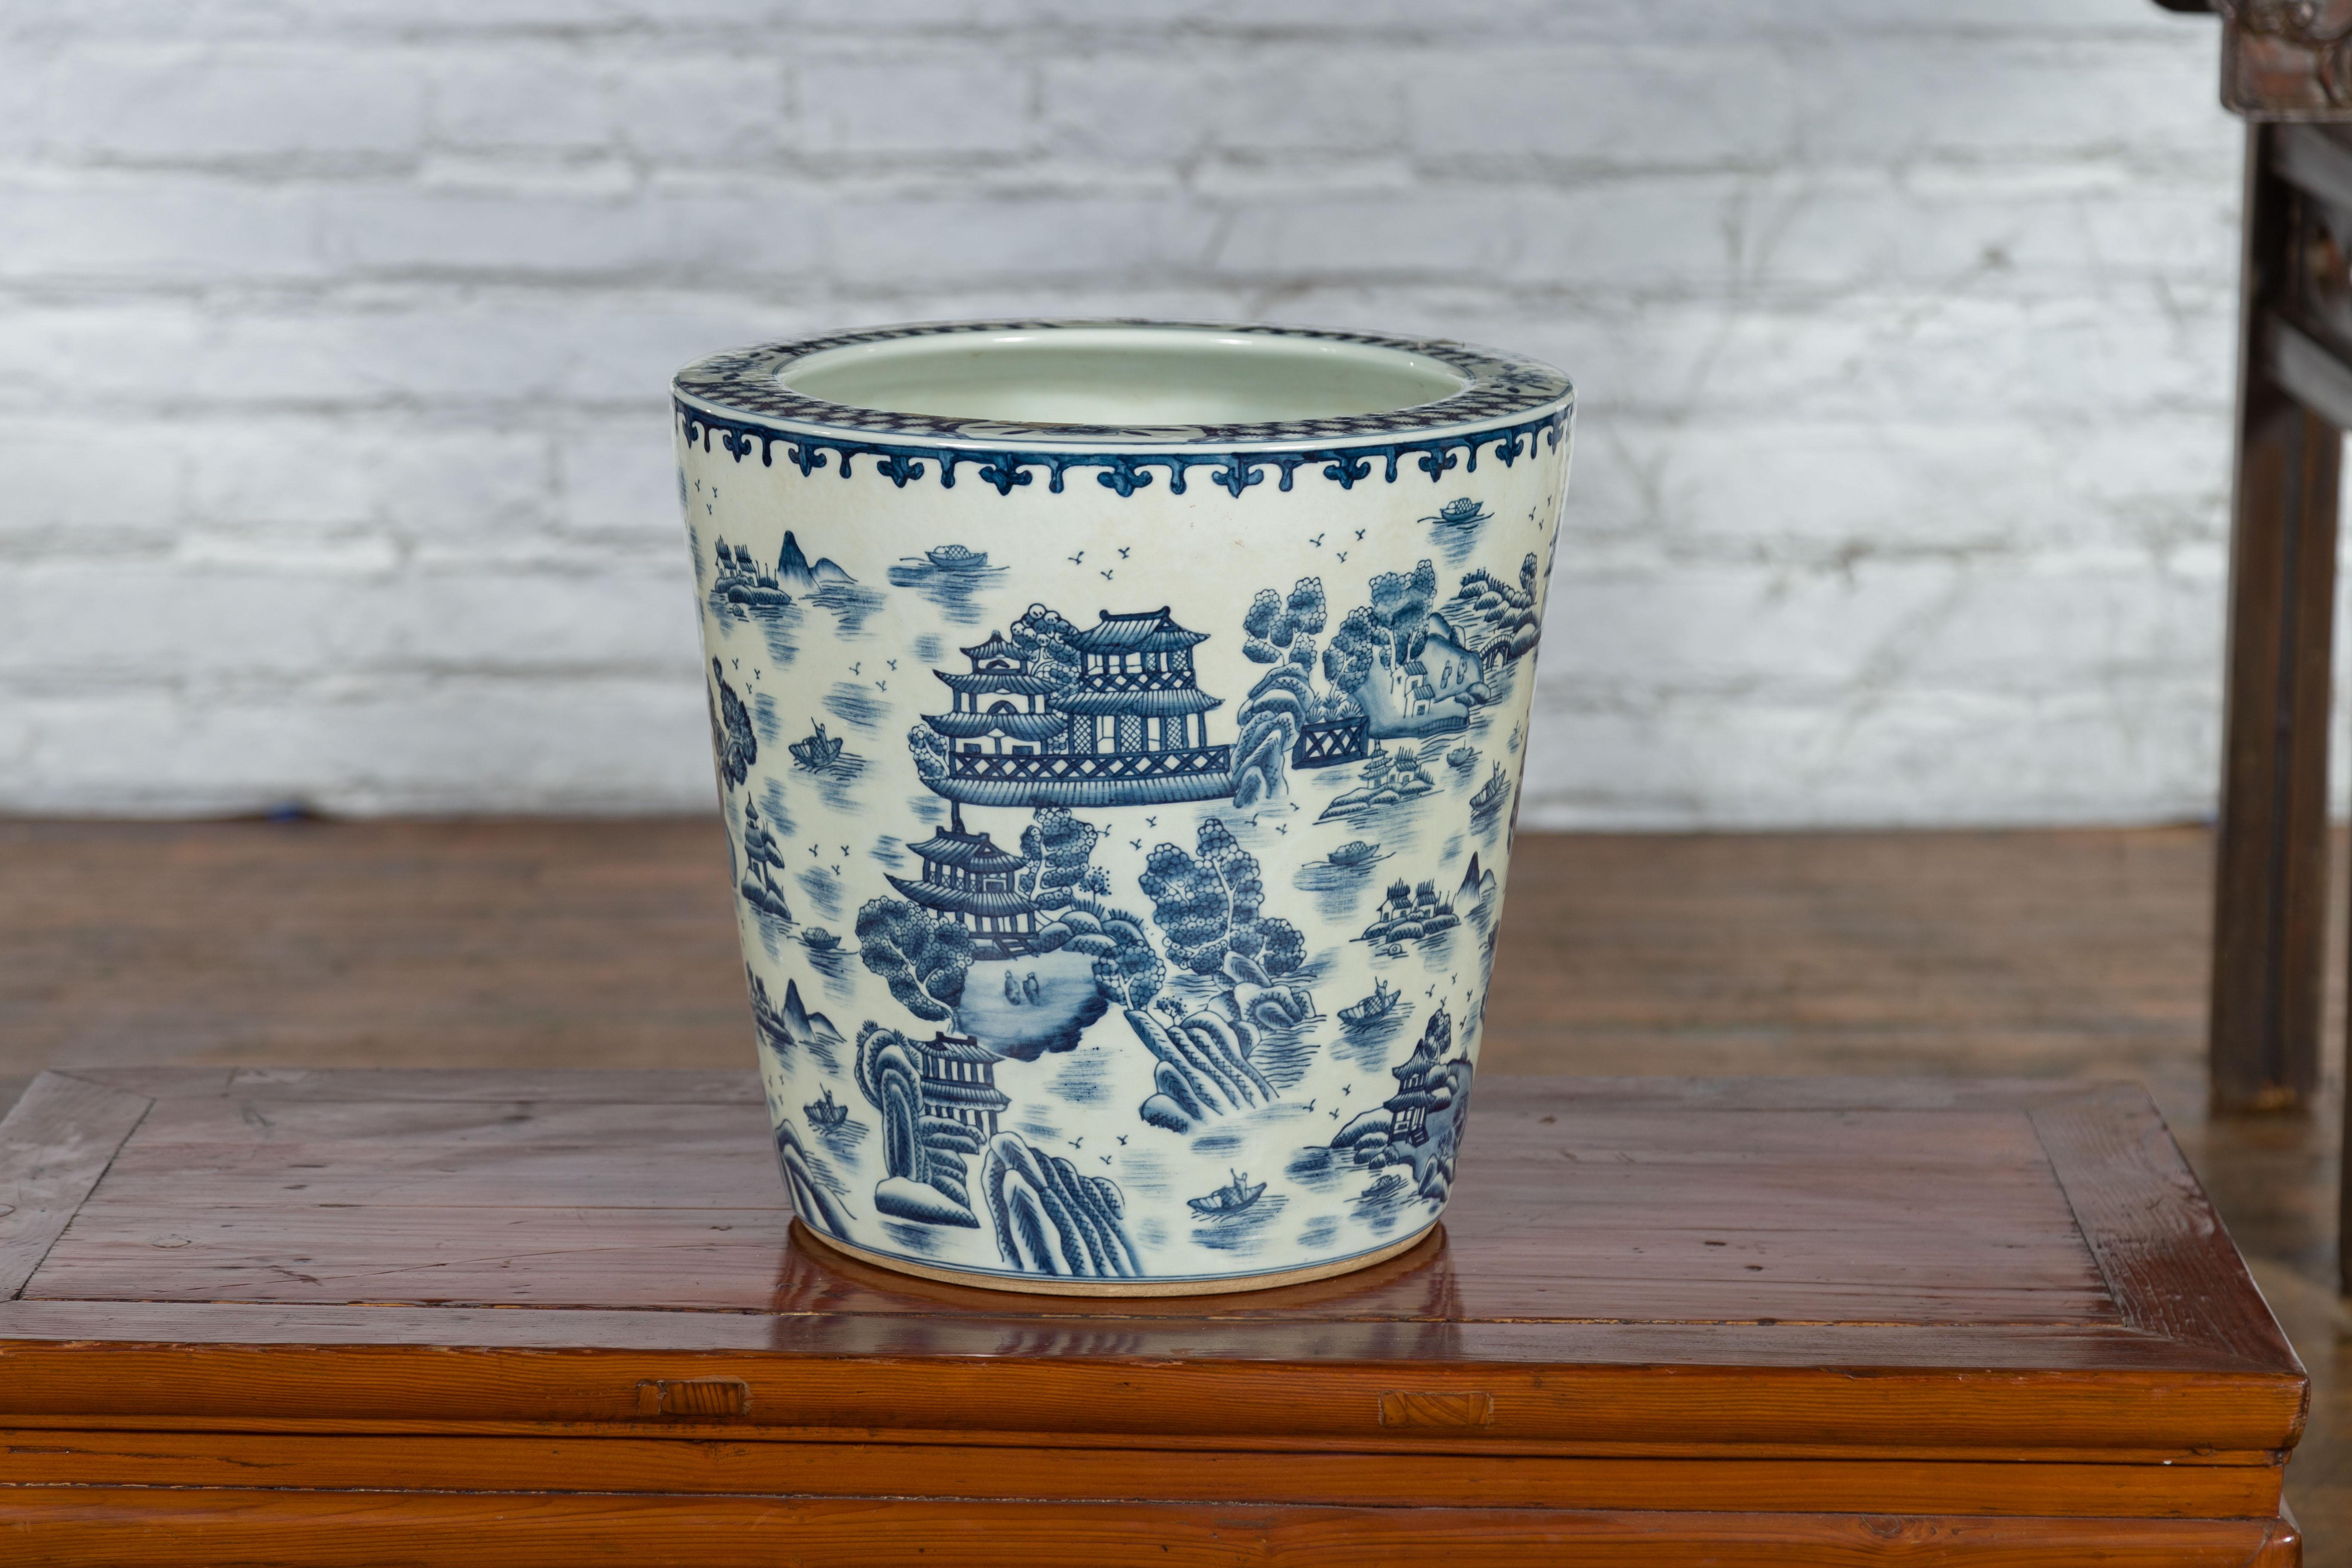 A Chinese vintage porcelain cache-pot planter from the mid 20th century with hand-painted blue and white décor depicting landscapes, architectures and figures in boats patterns. Created in China during the midcentury period, this porcelain cache-pot